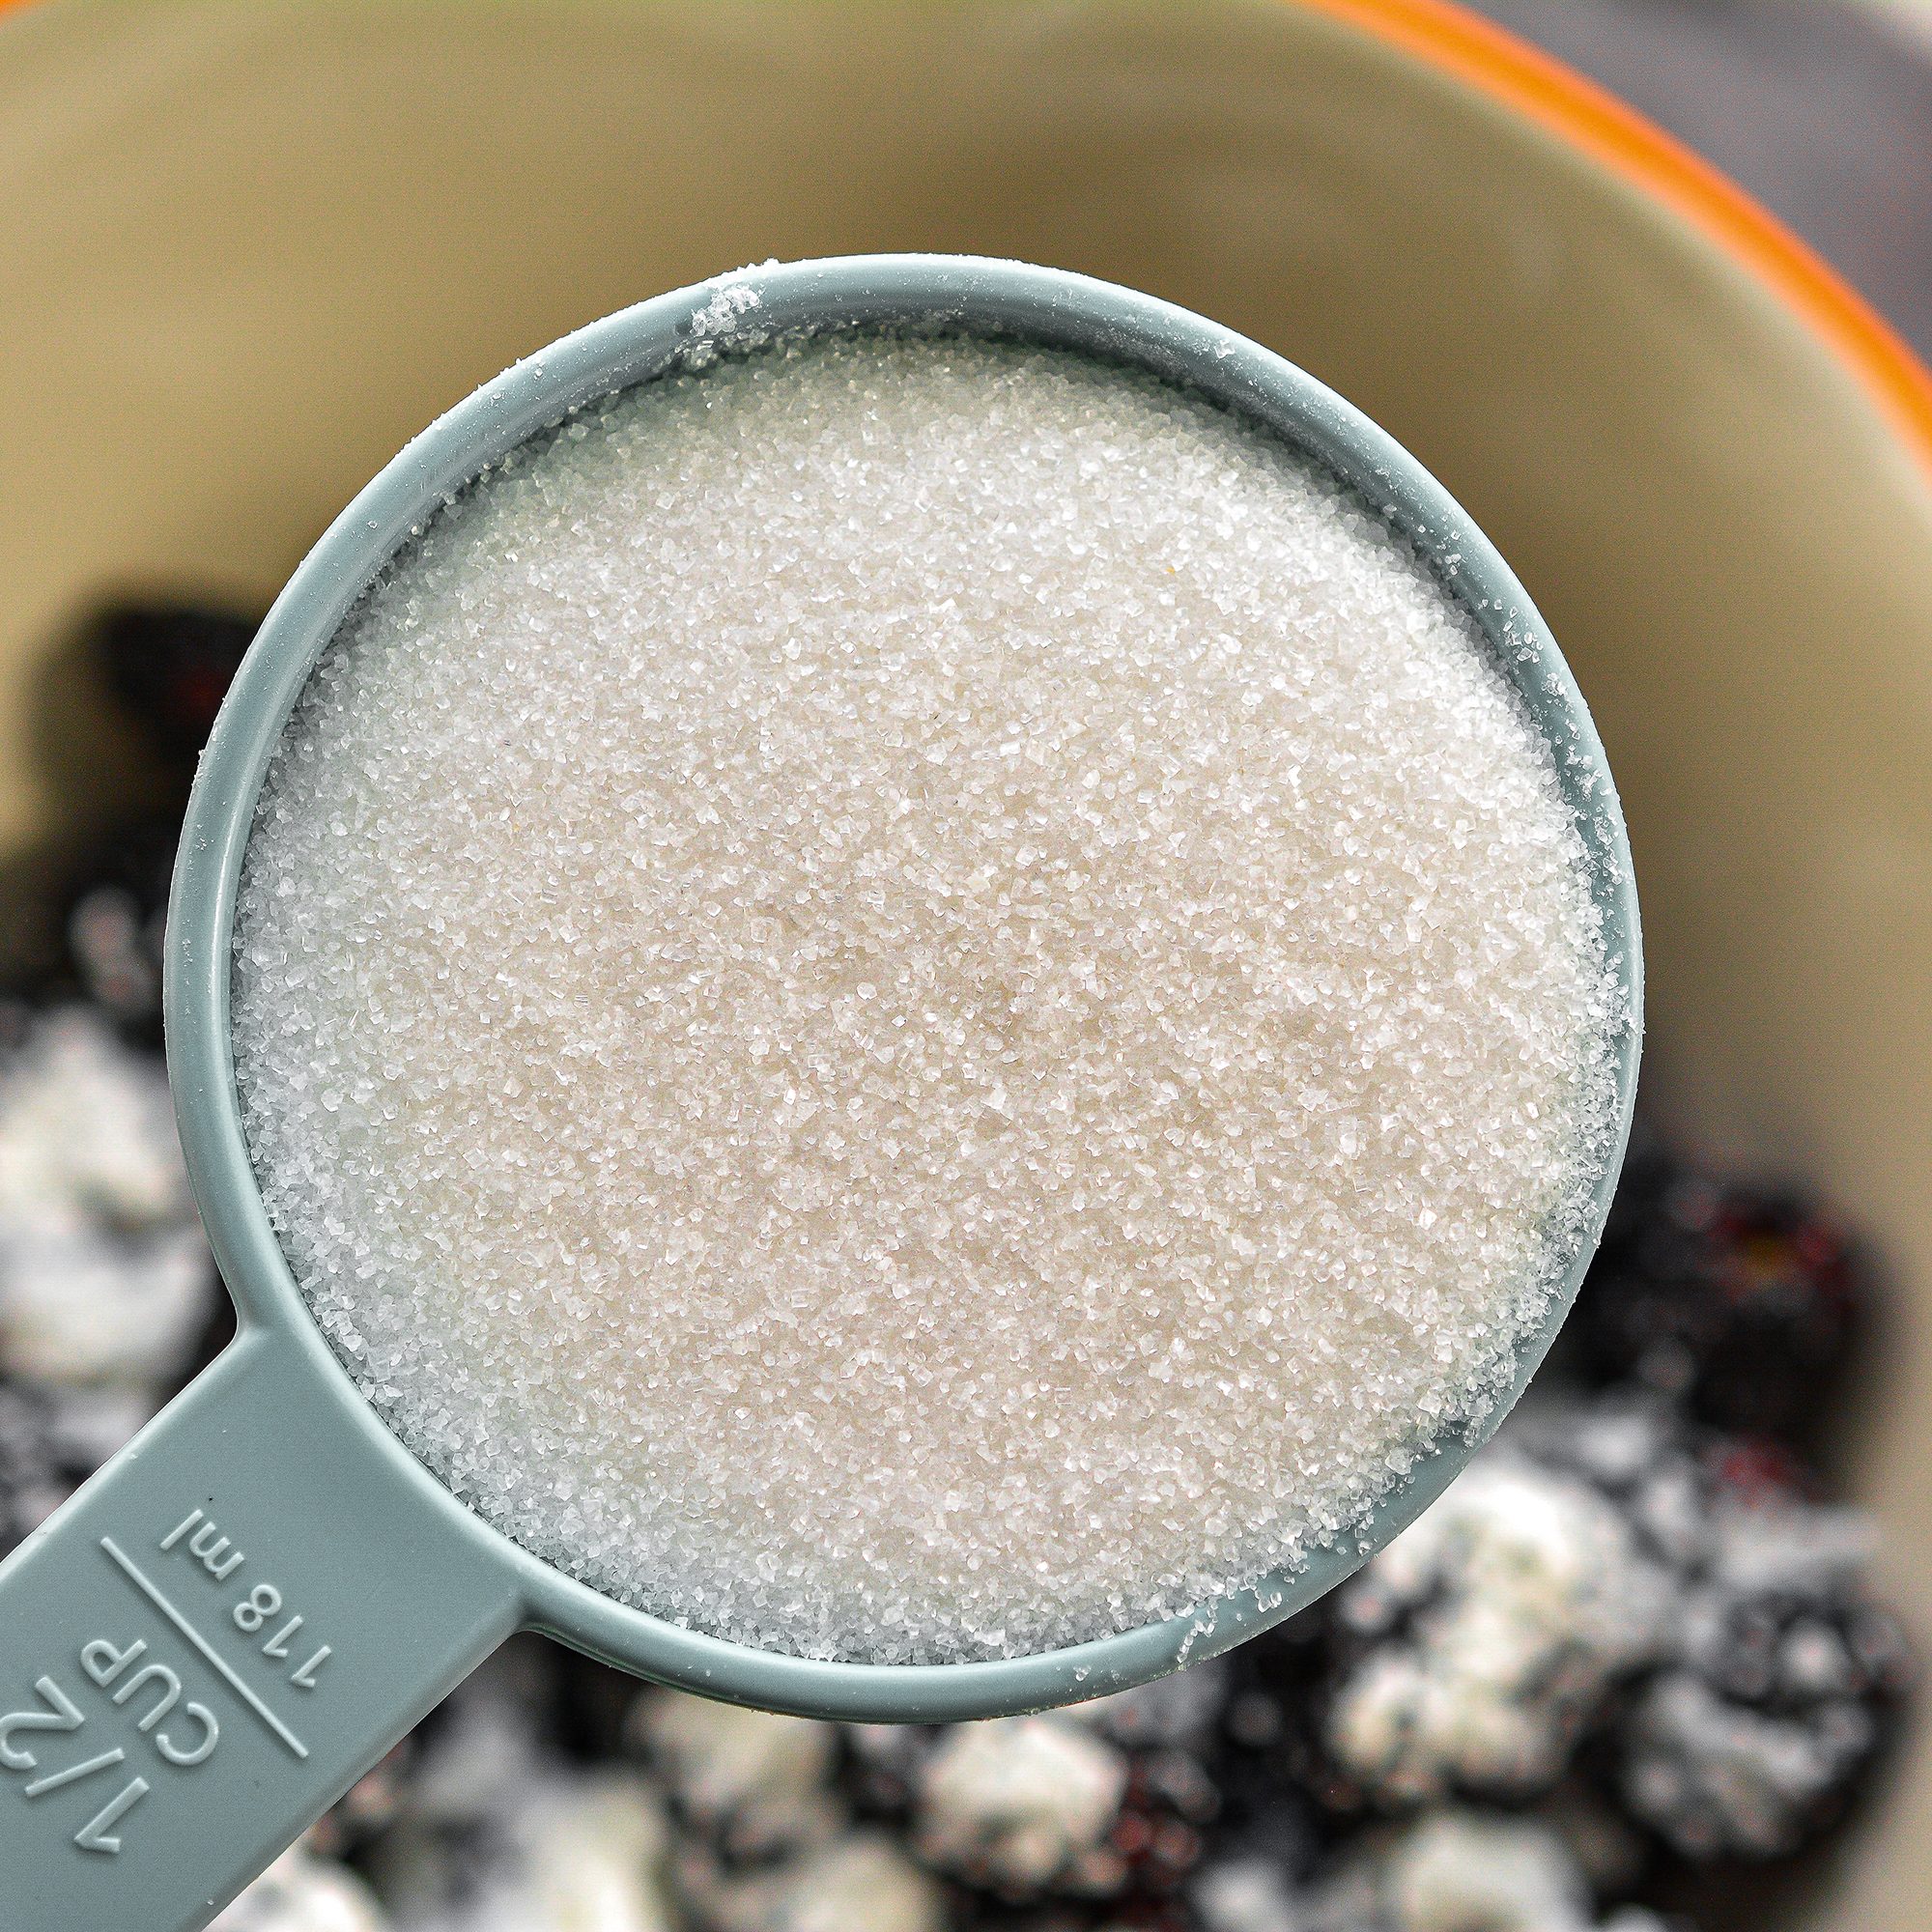 Add the berries, cornstarch, and ½ cup sugar to a mixing bowl and toss to coat. Drizzle the ¼ cup of melted butter over the berries and stir to combine.